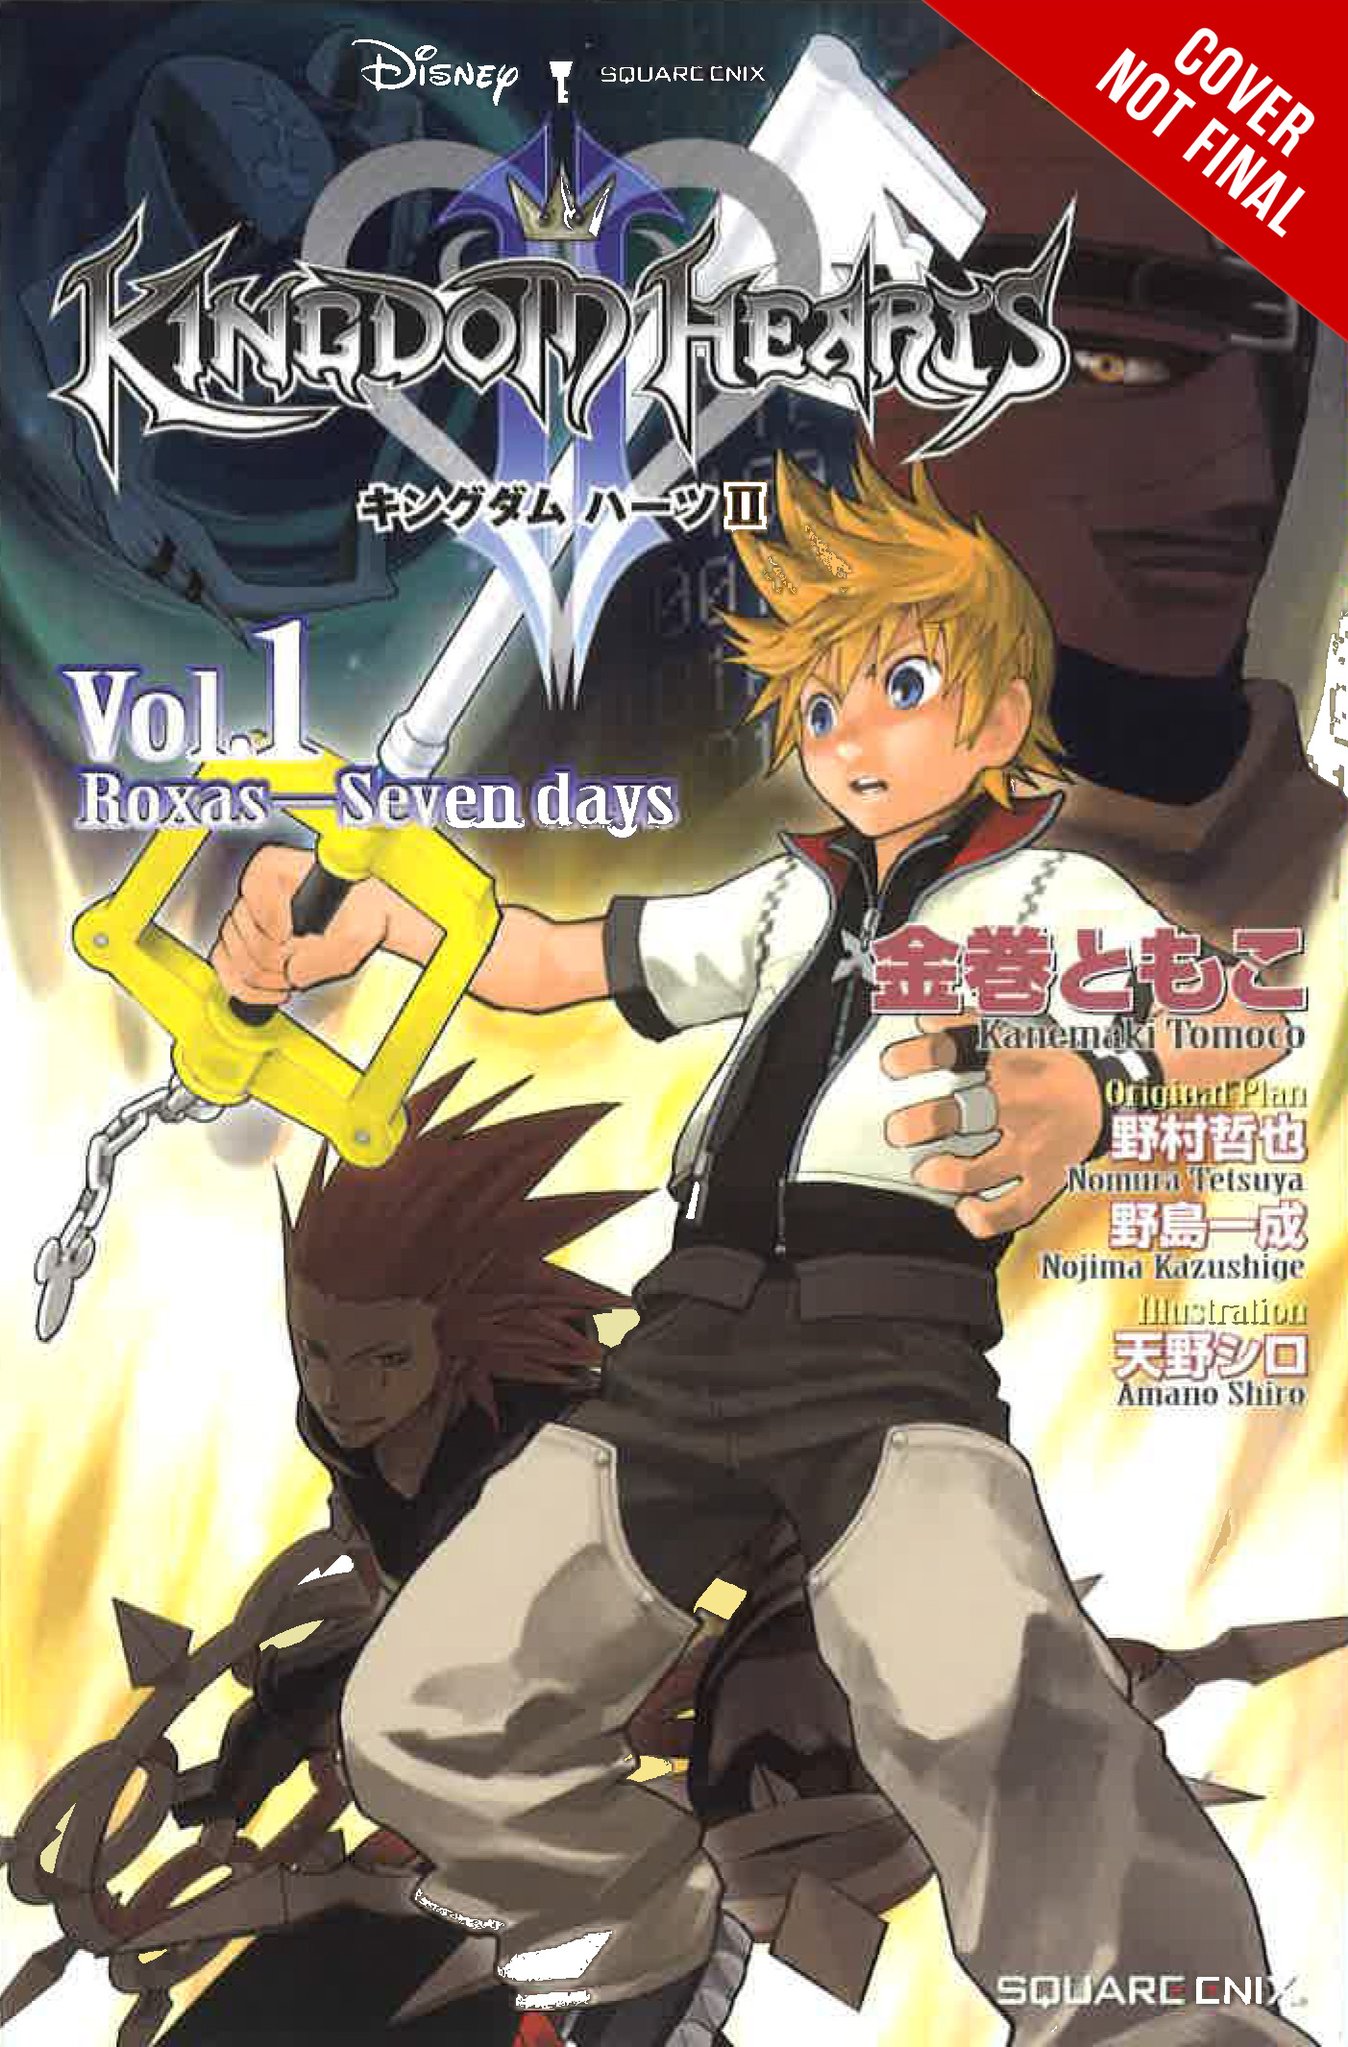 KH2, BBS, and 358/2 Days Novels being published by Yen Press - News - Kingdom Hearts Insider